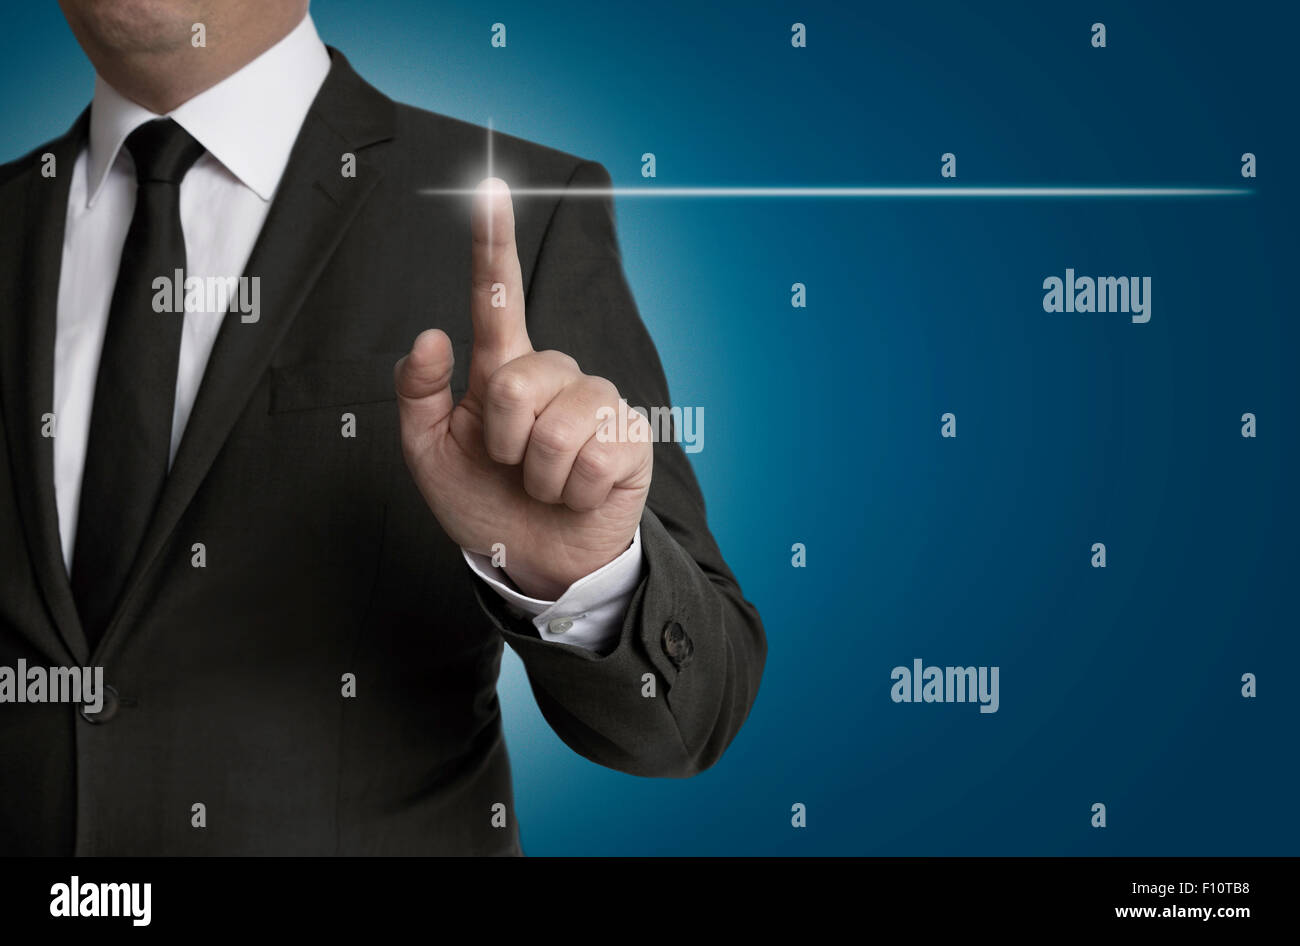 touchscreen is operated by businessman concept. Stock Photo